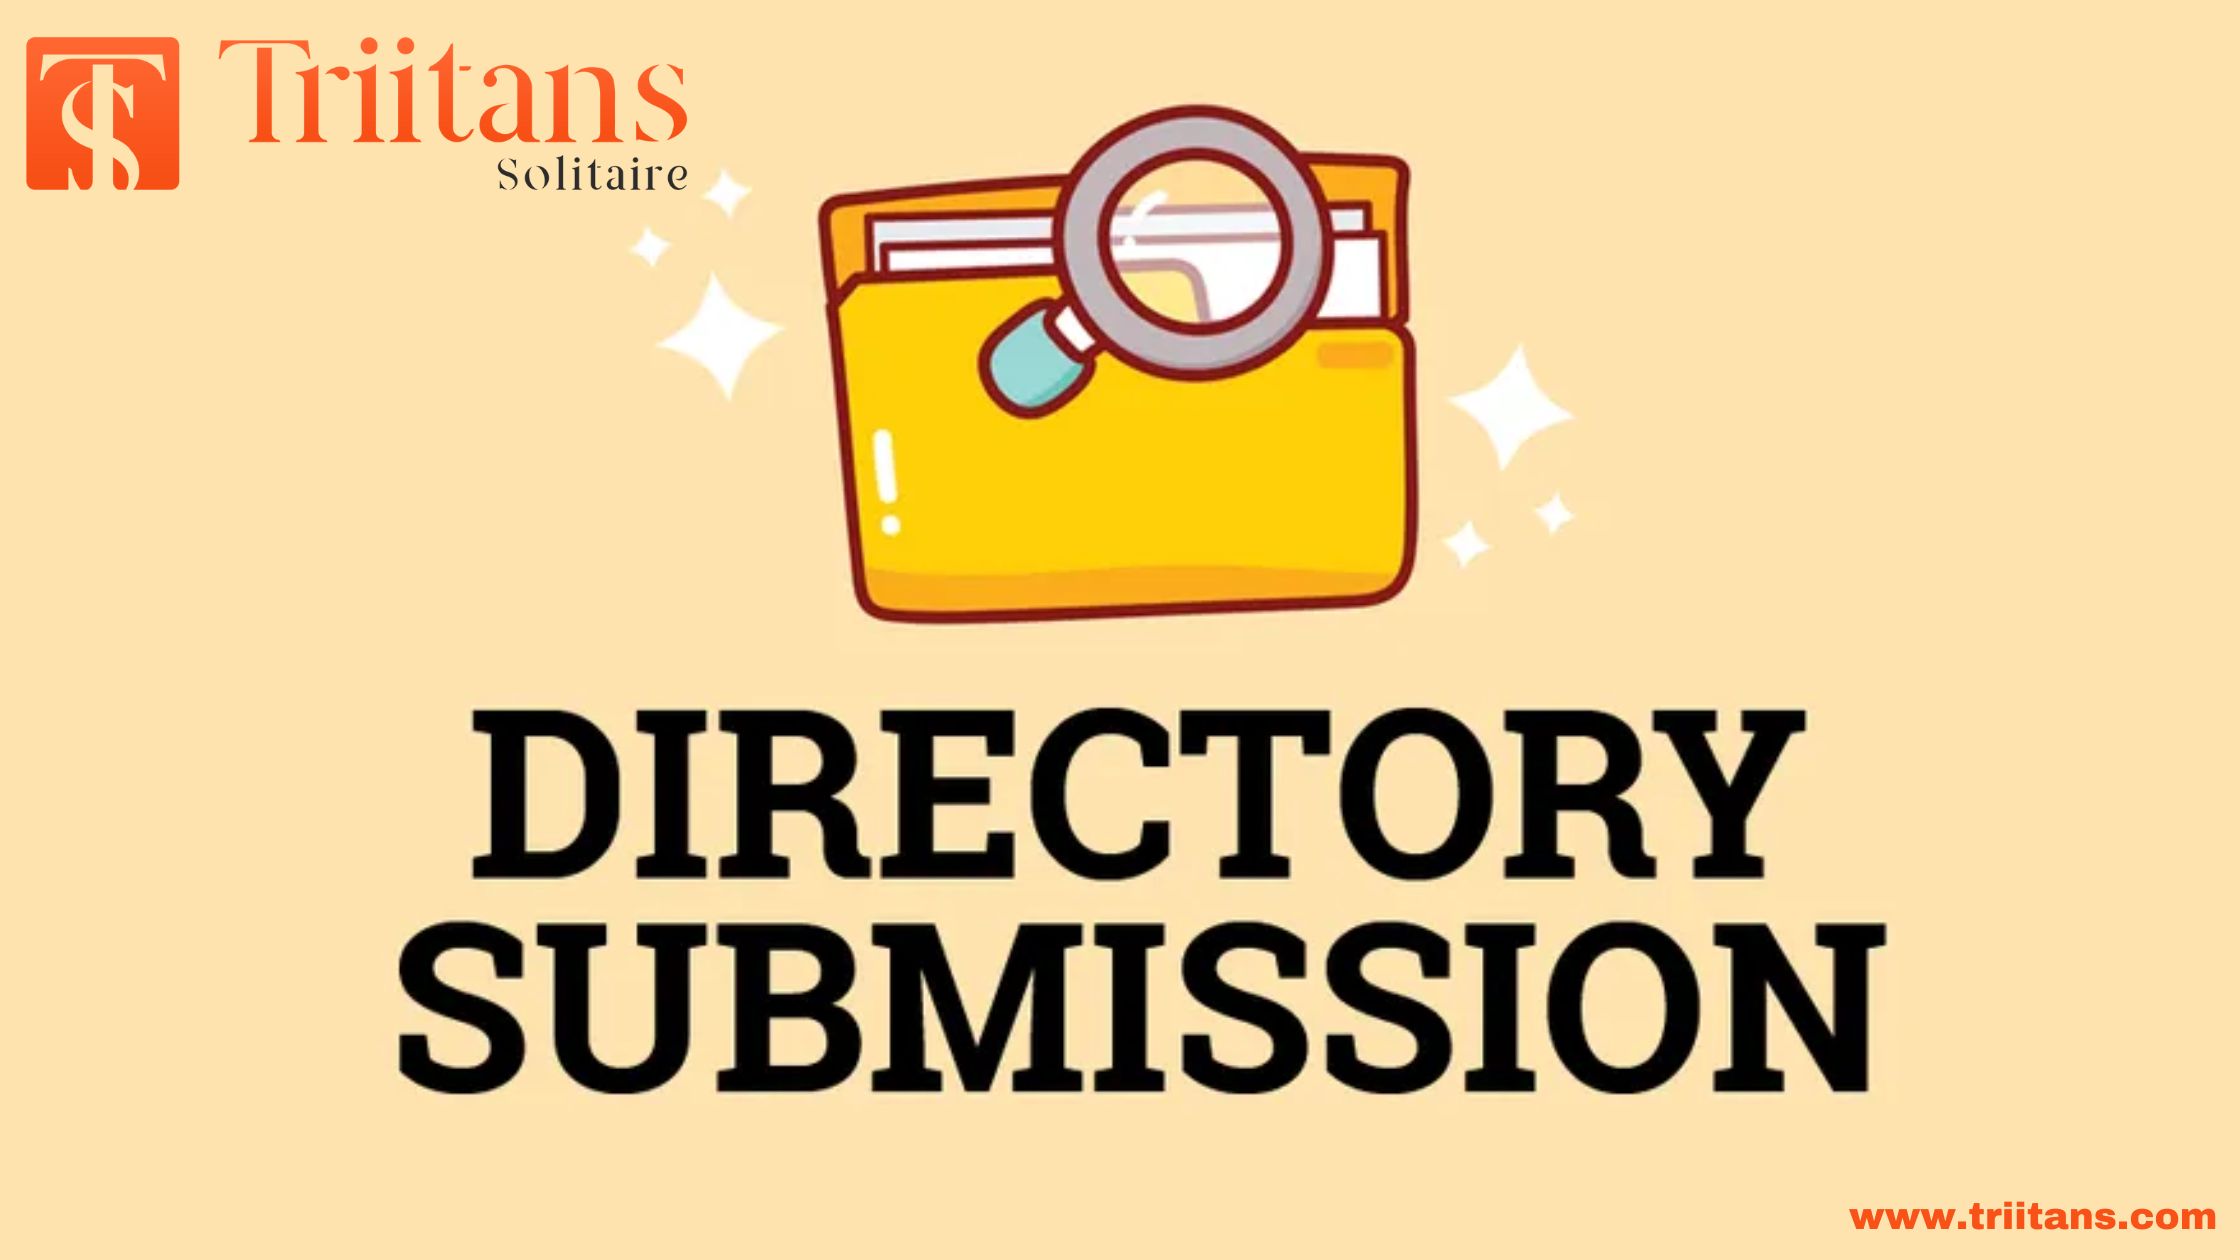 Free directory submission sites list 2020 with high DA PA